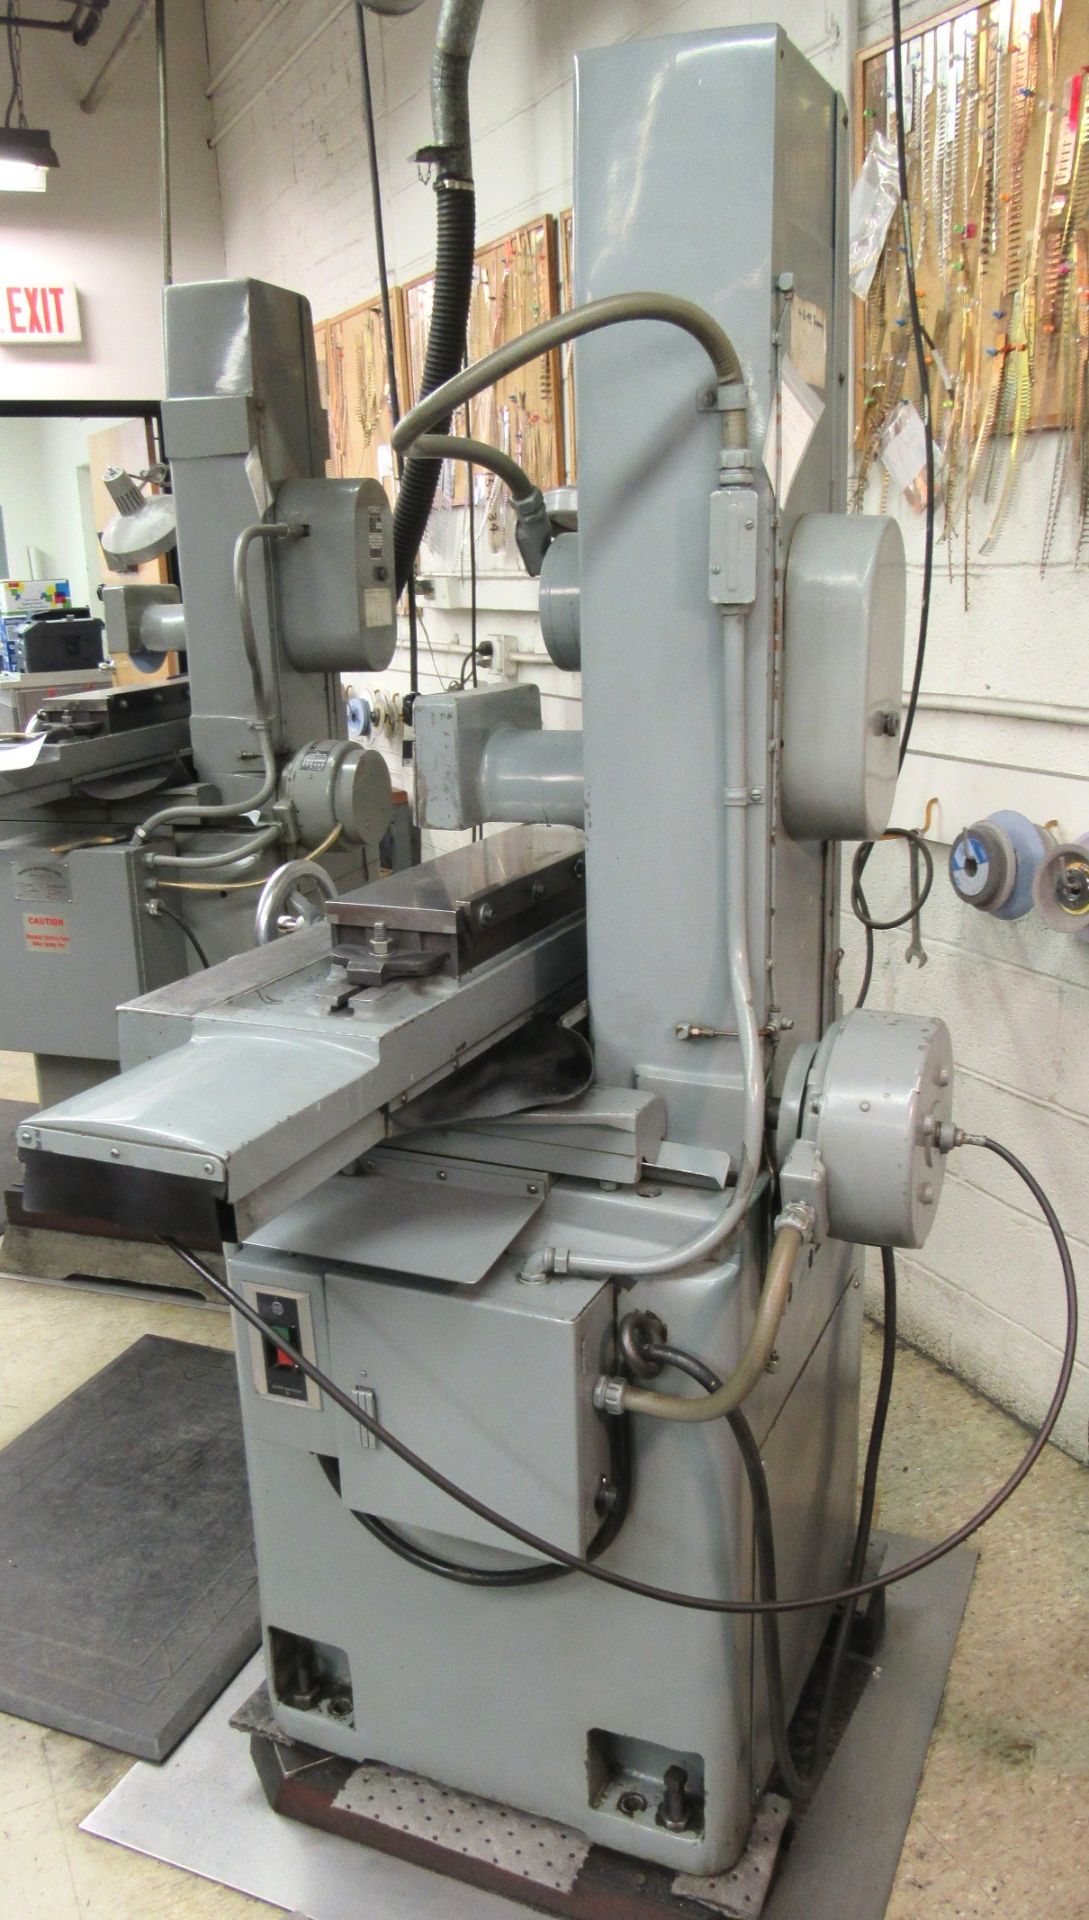 Parker Majestic Model 2Z 6" x 18" Hand Feed Precision Surface Grinder- S/N 3236-ZB-76 - Image 3 of 7